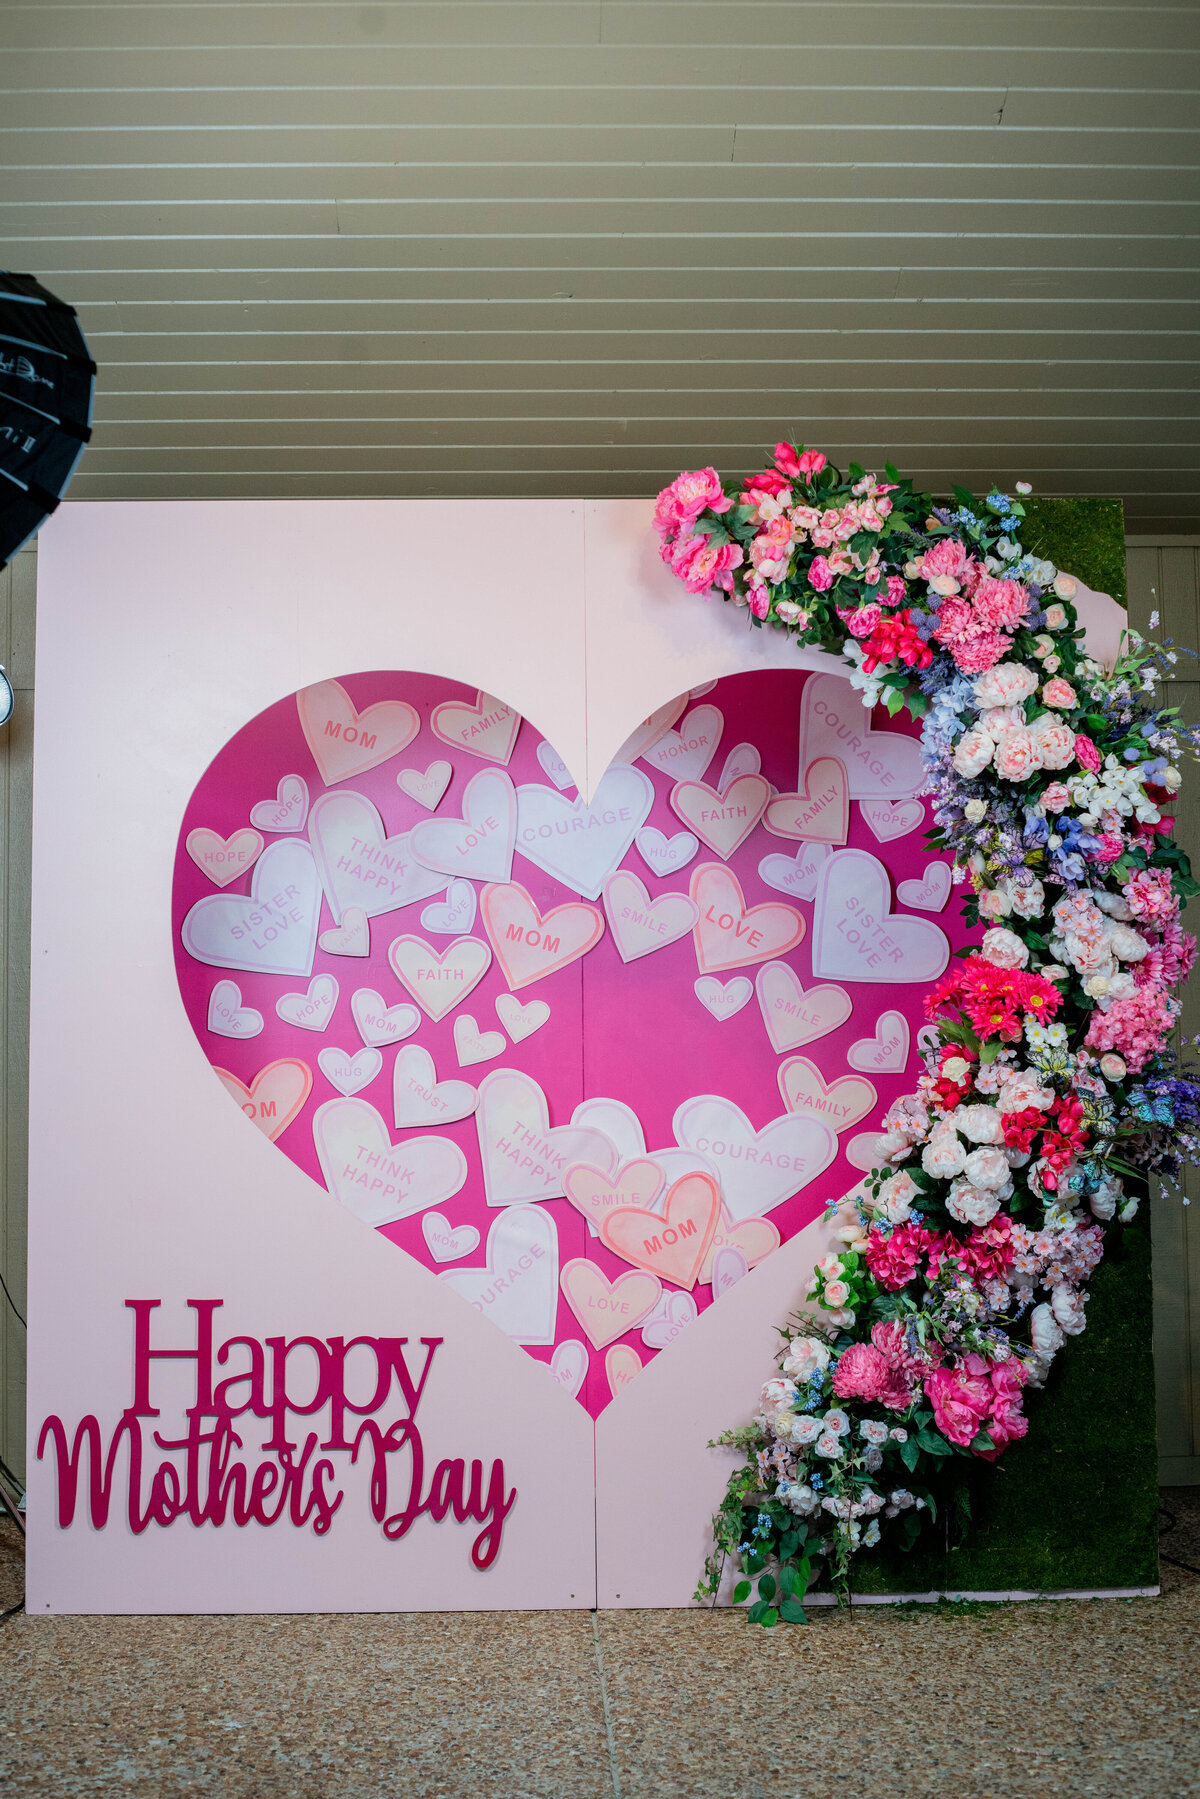 Happy Mother's Day heart shaped photo booth backdrop  design with floral arch